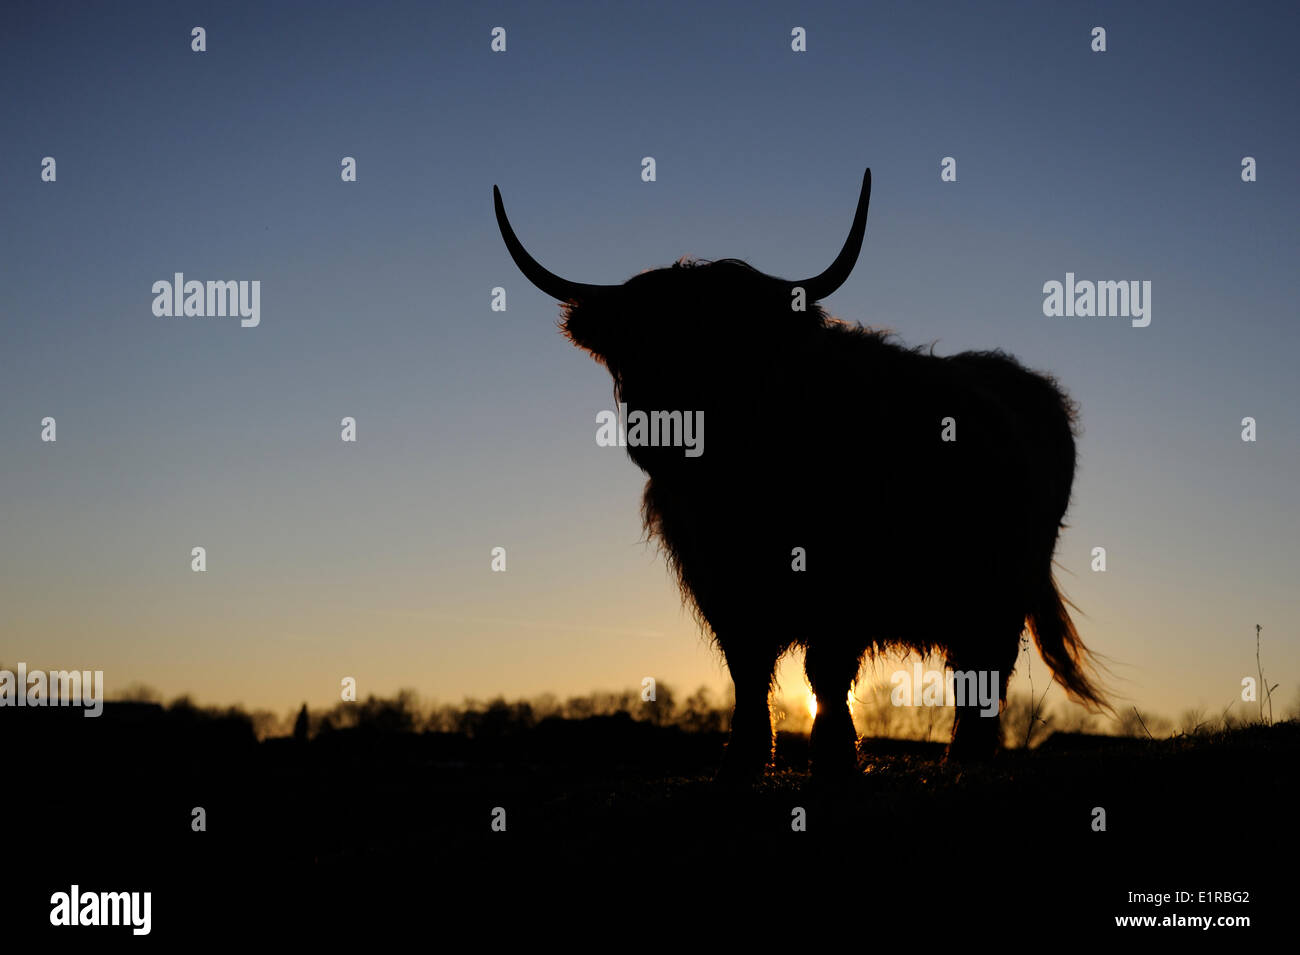 Silhouette of a cow with big horns Stock Photo